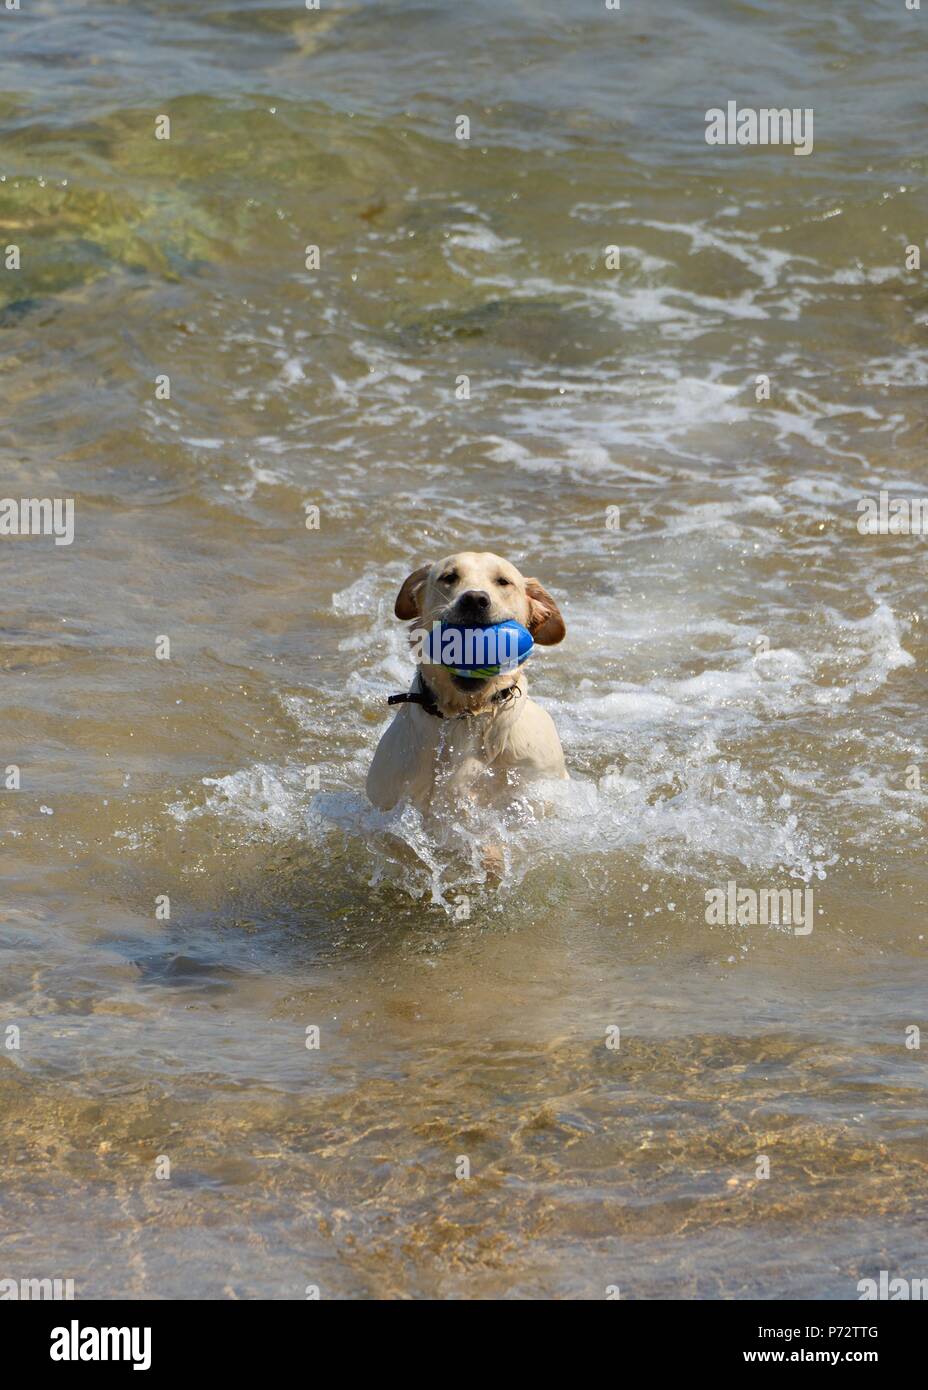 A golden retriever enjoying cooling off and playing in the sea at Embo during the heatwave of 2018 in Sutherland, Scotland, UK Stock Photo